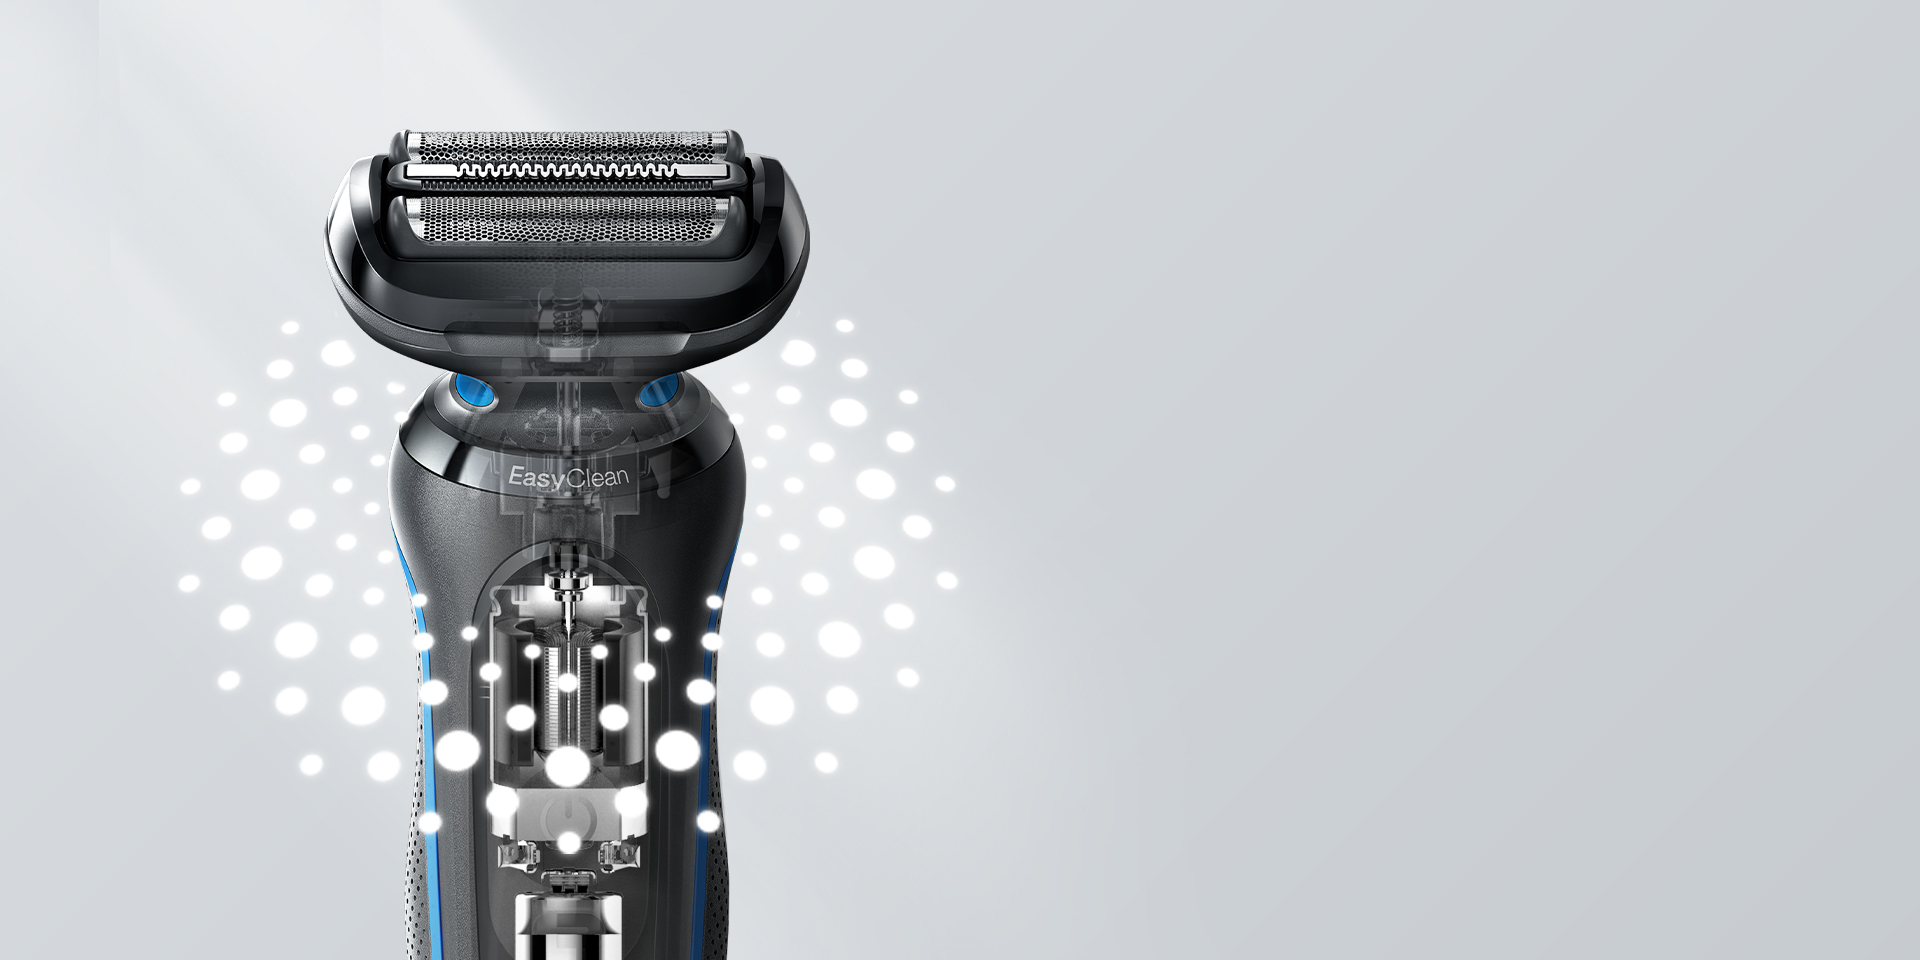 Series 5 51-B1200s Wet & Dry shaver with 1 attachment, blue.